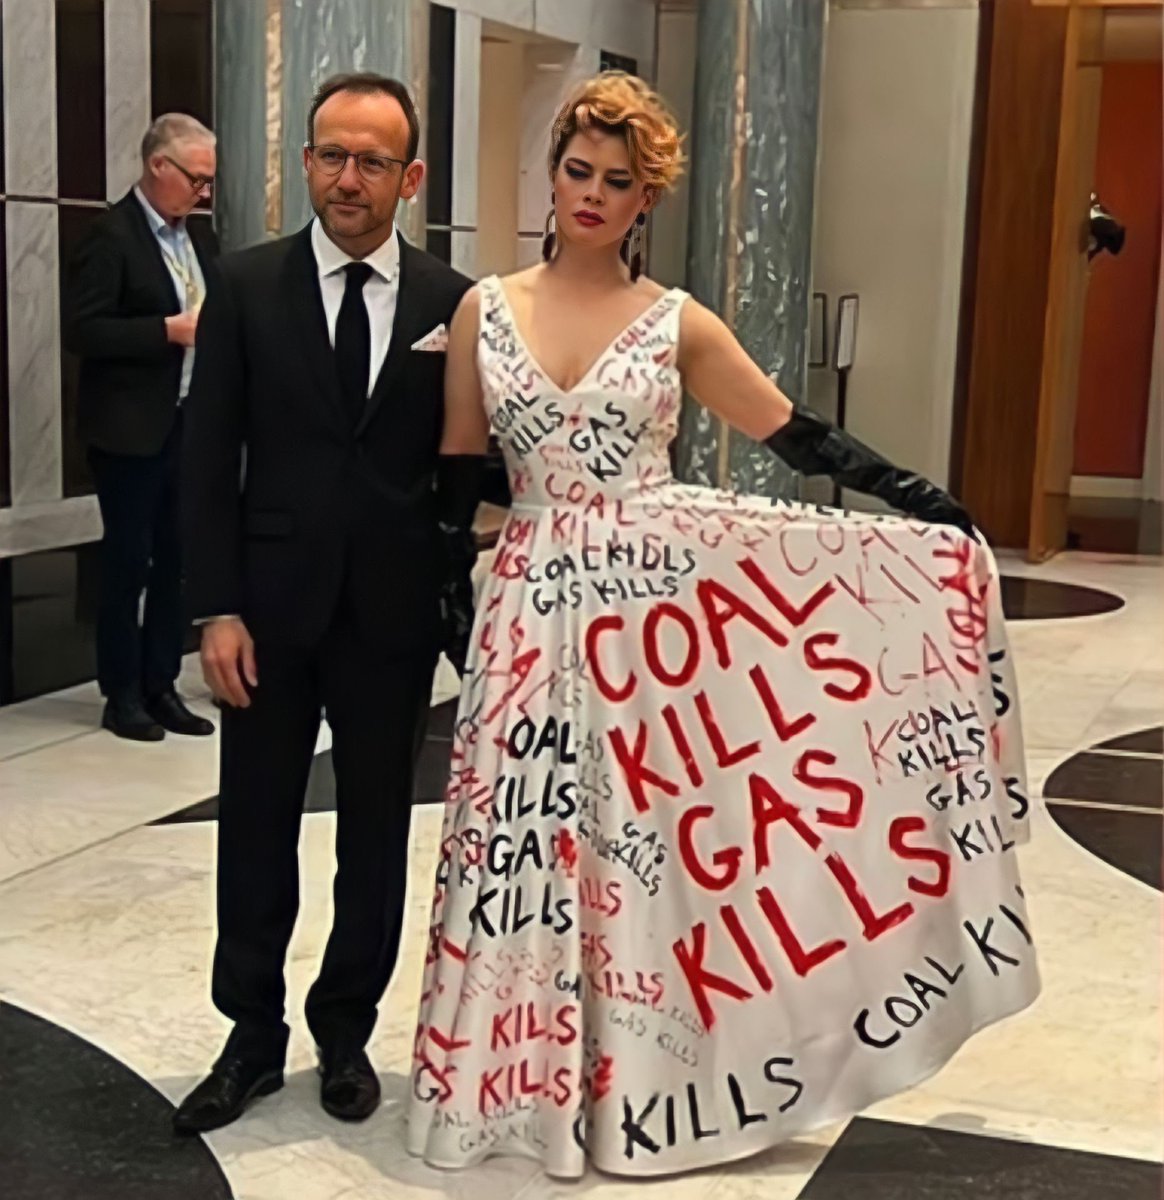 You're not a real climate activist until you've protested fossil fuels by wearing a polyester dress made from petroleum oil. #EnvironmentalDefenders